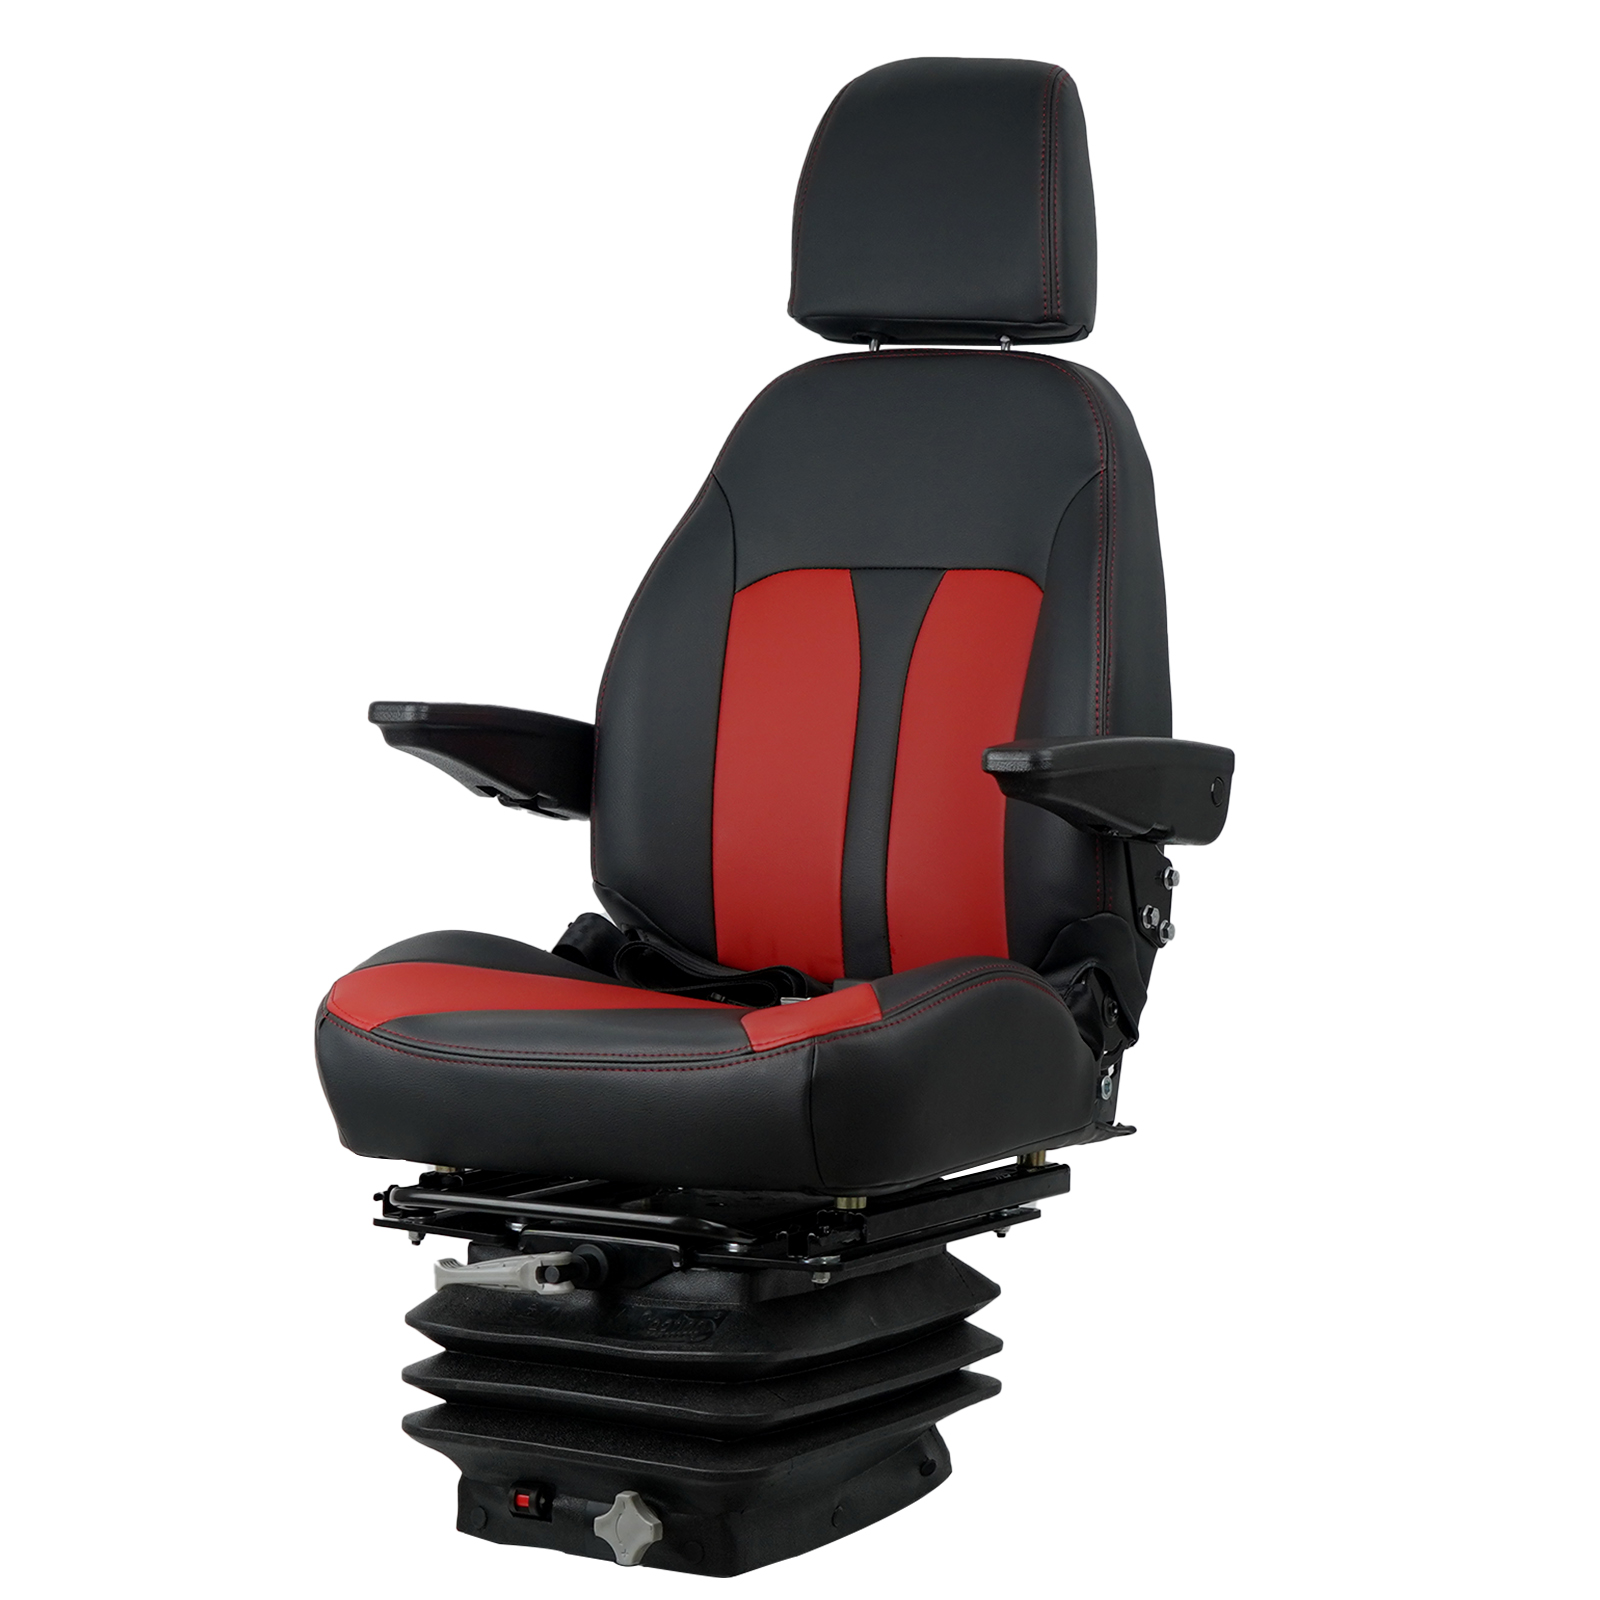 Tractor Seats with Narrow Space-saving Mechanical Suspension Featured Image